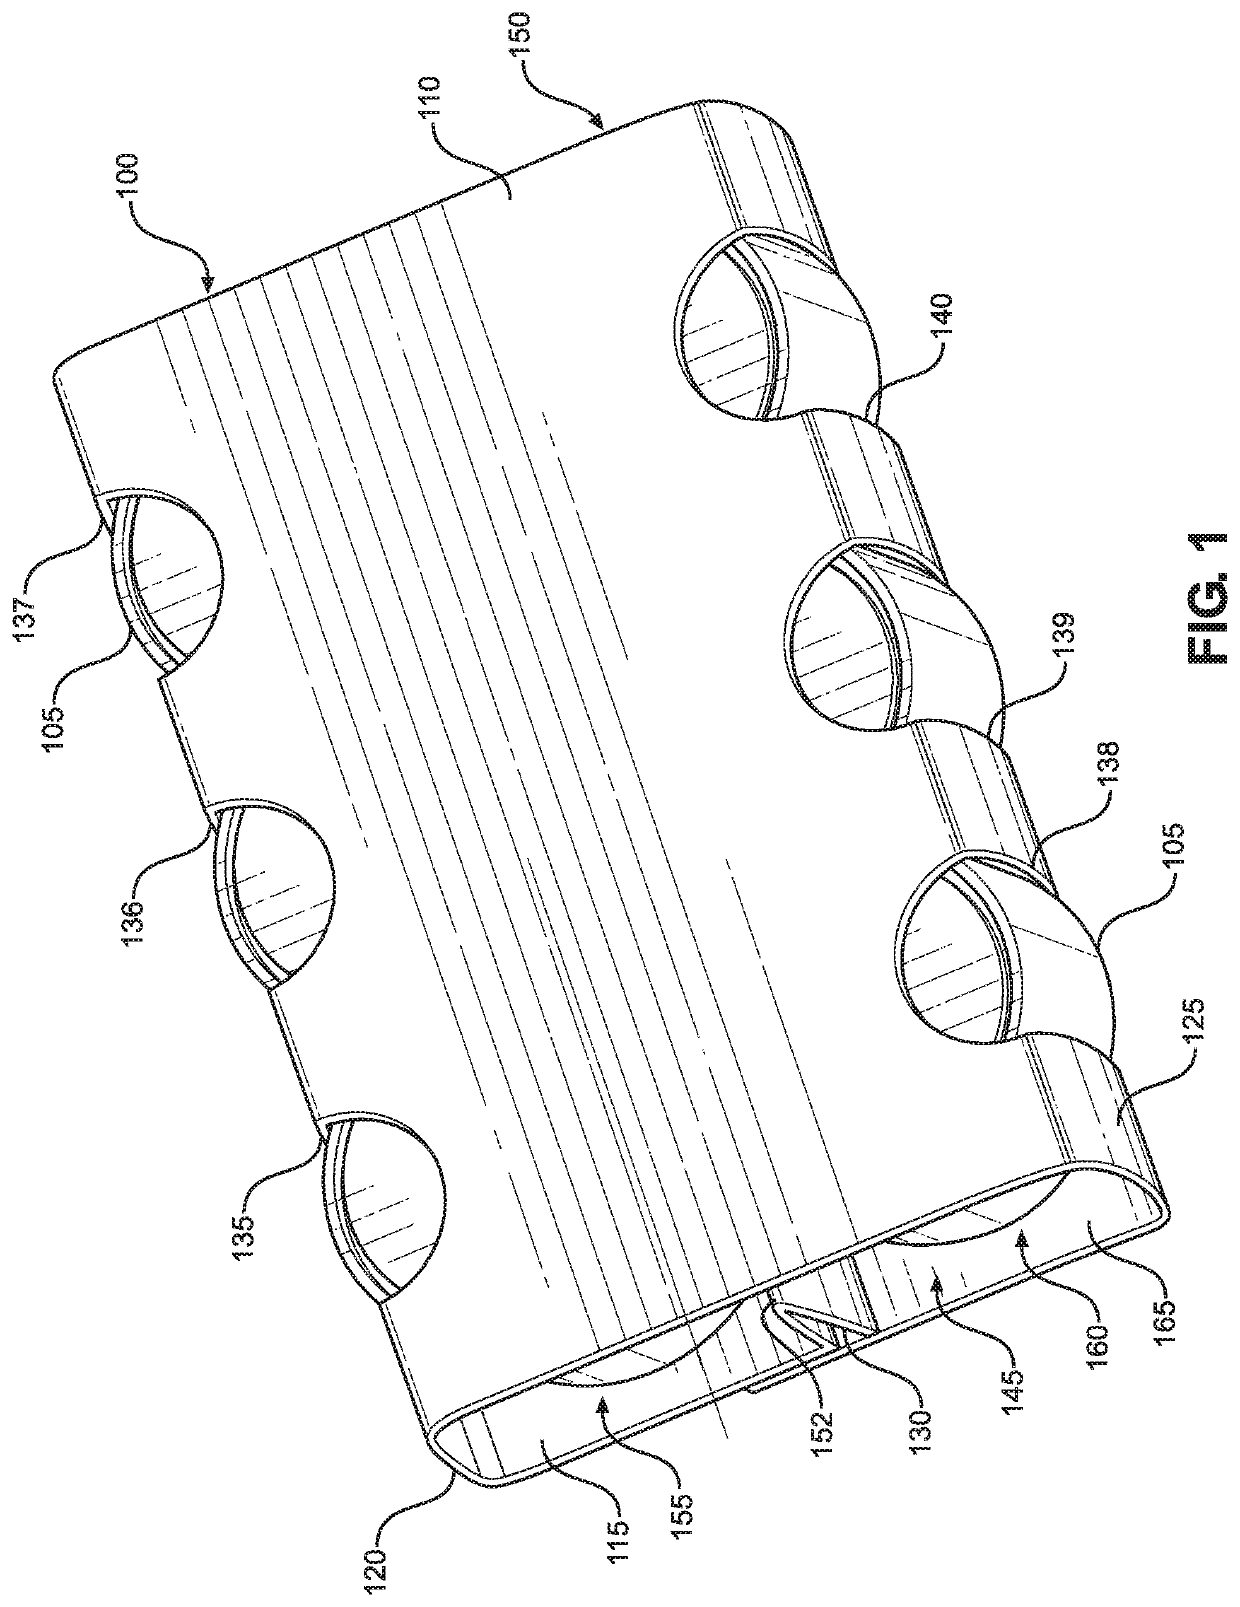 Packaging sleeve and method of retaining a plurality of individually packaged products